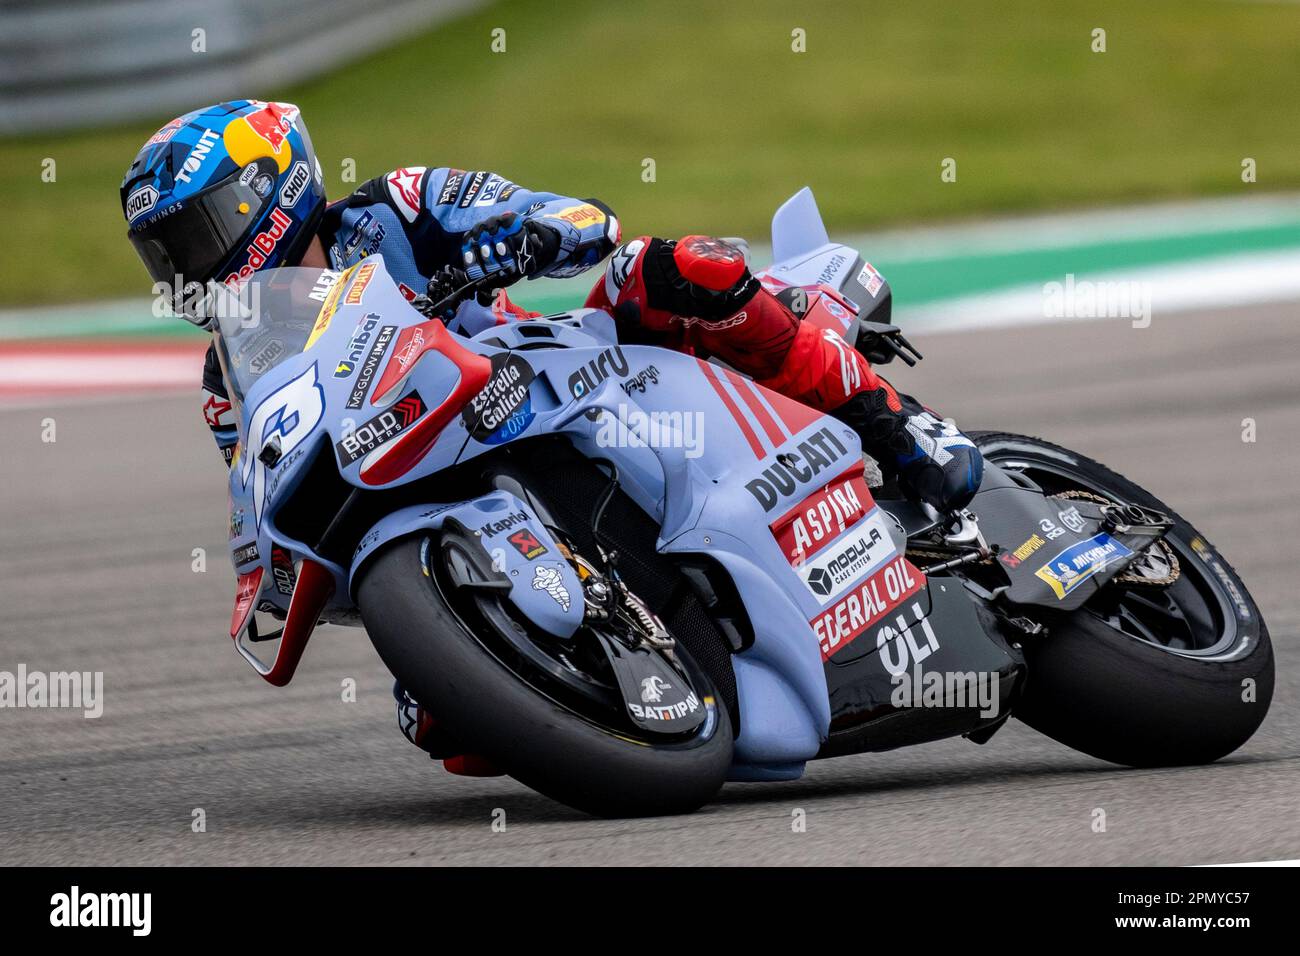 April 15, 2023.Alex Marquez #73 with Gresini Racing MotoGP during the 15 minute qualifying at the Red Bull Grand Prix at Circuit of the Americas in Austin Texas